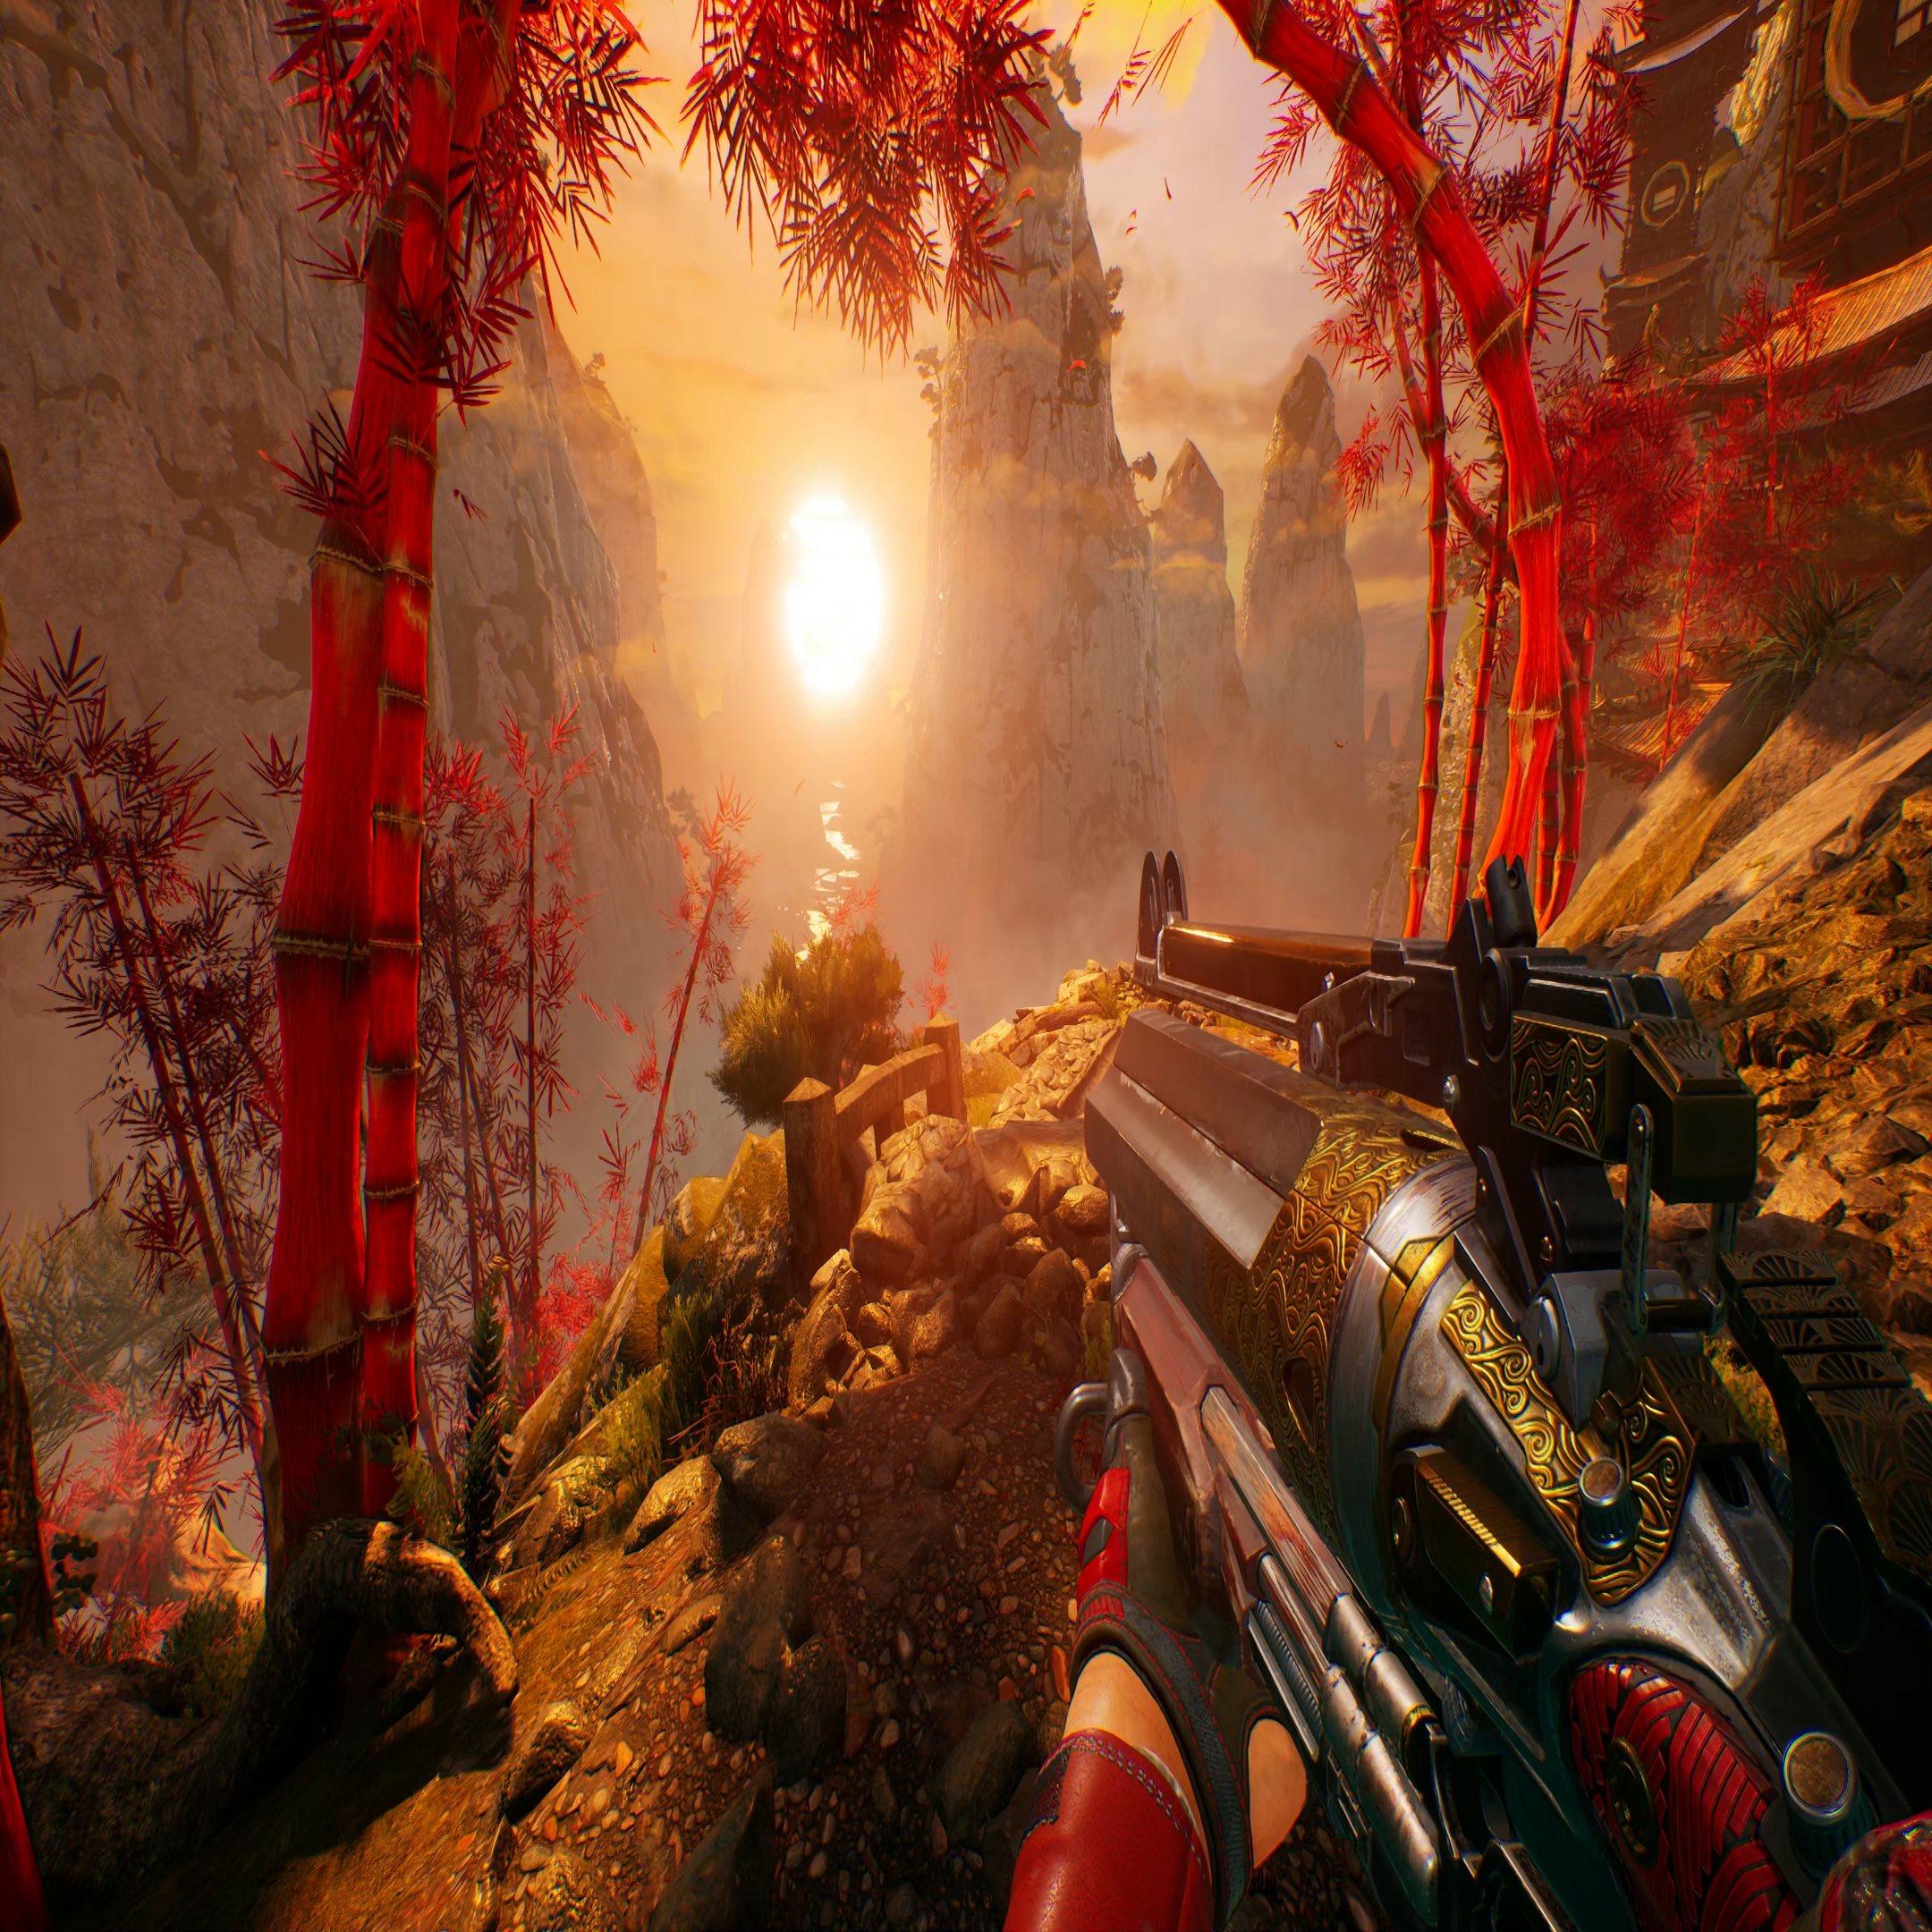 Shadow Warrior 3 PS4 Review: A Poor Console Port Marred by Issues